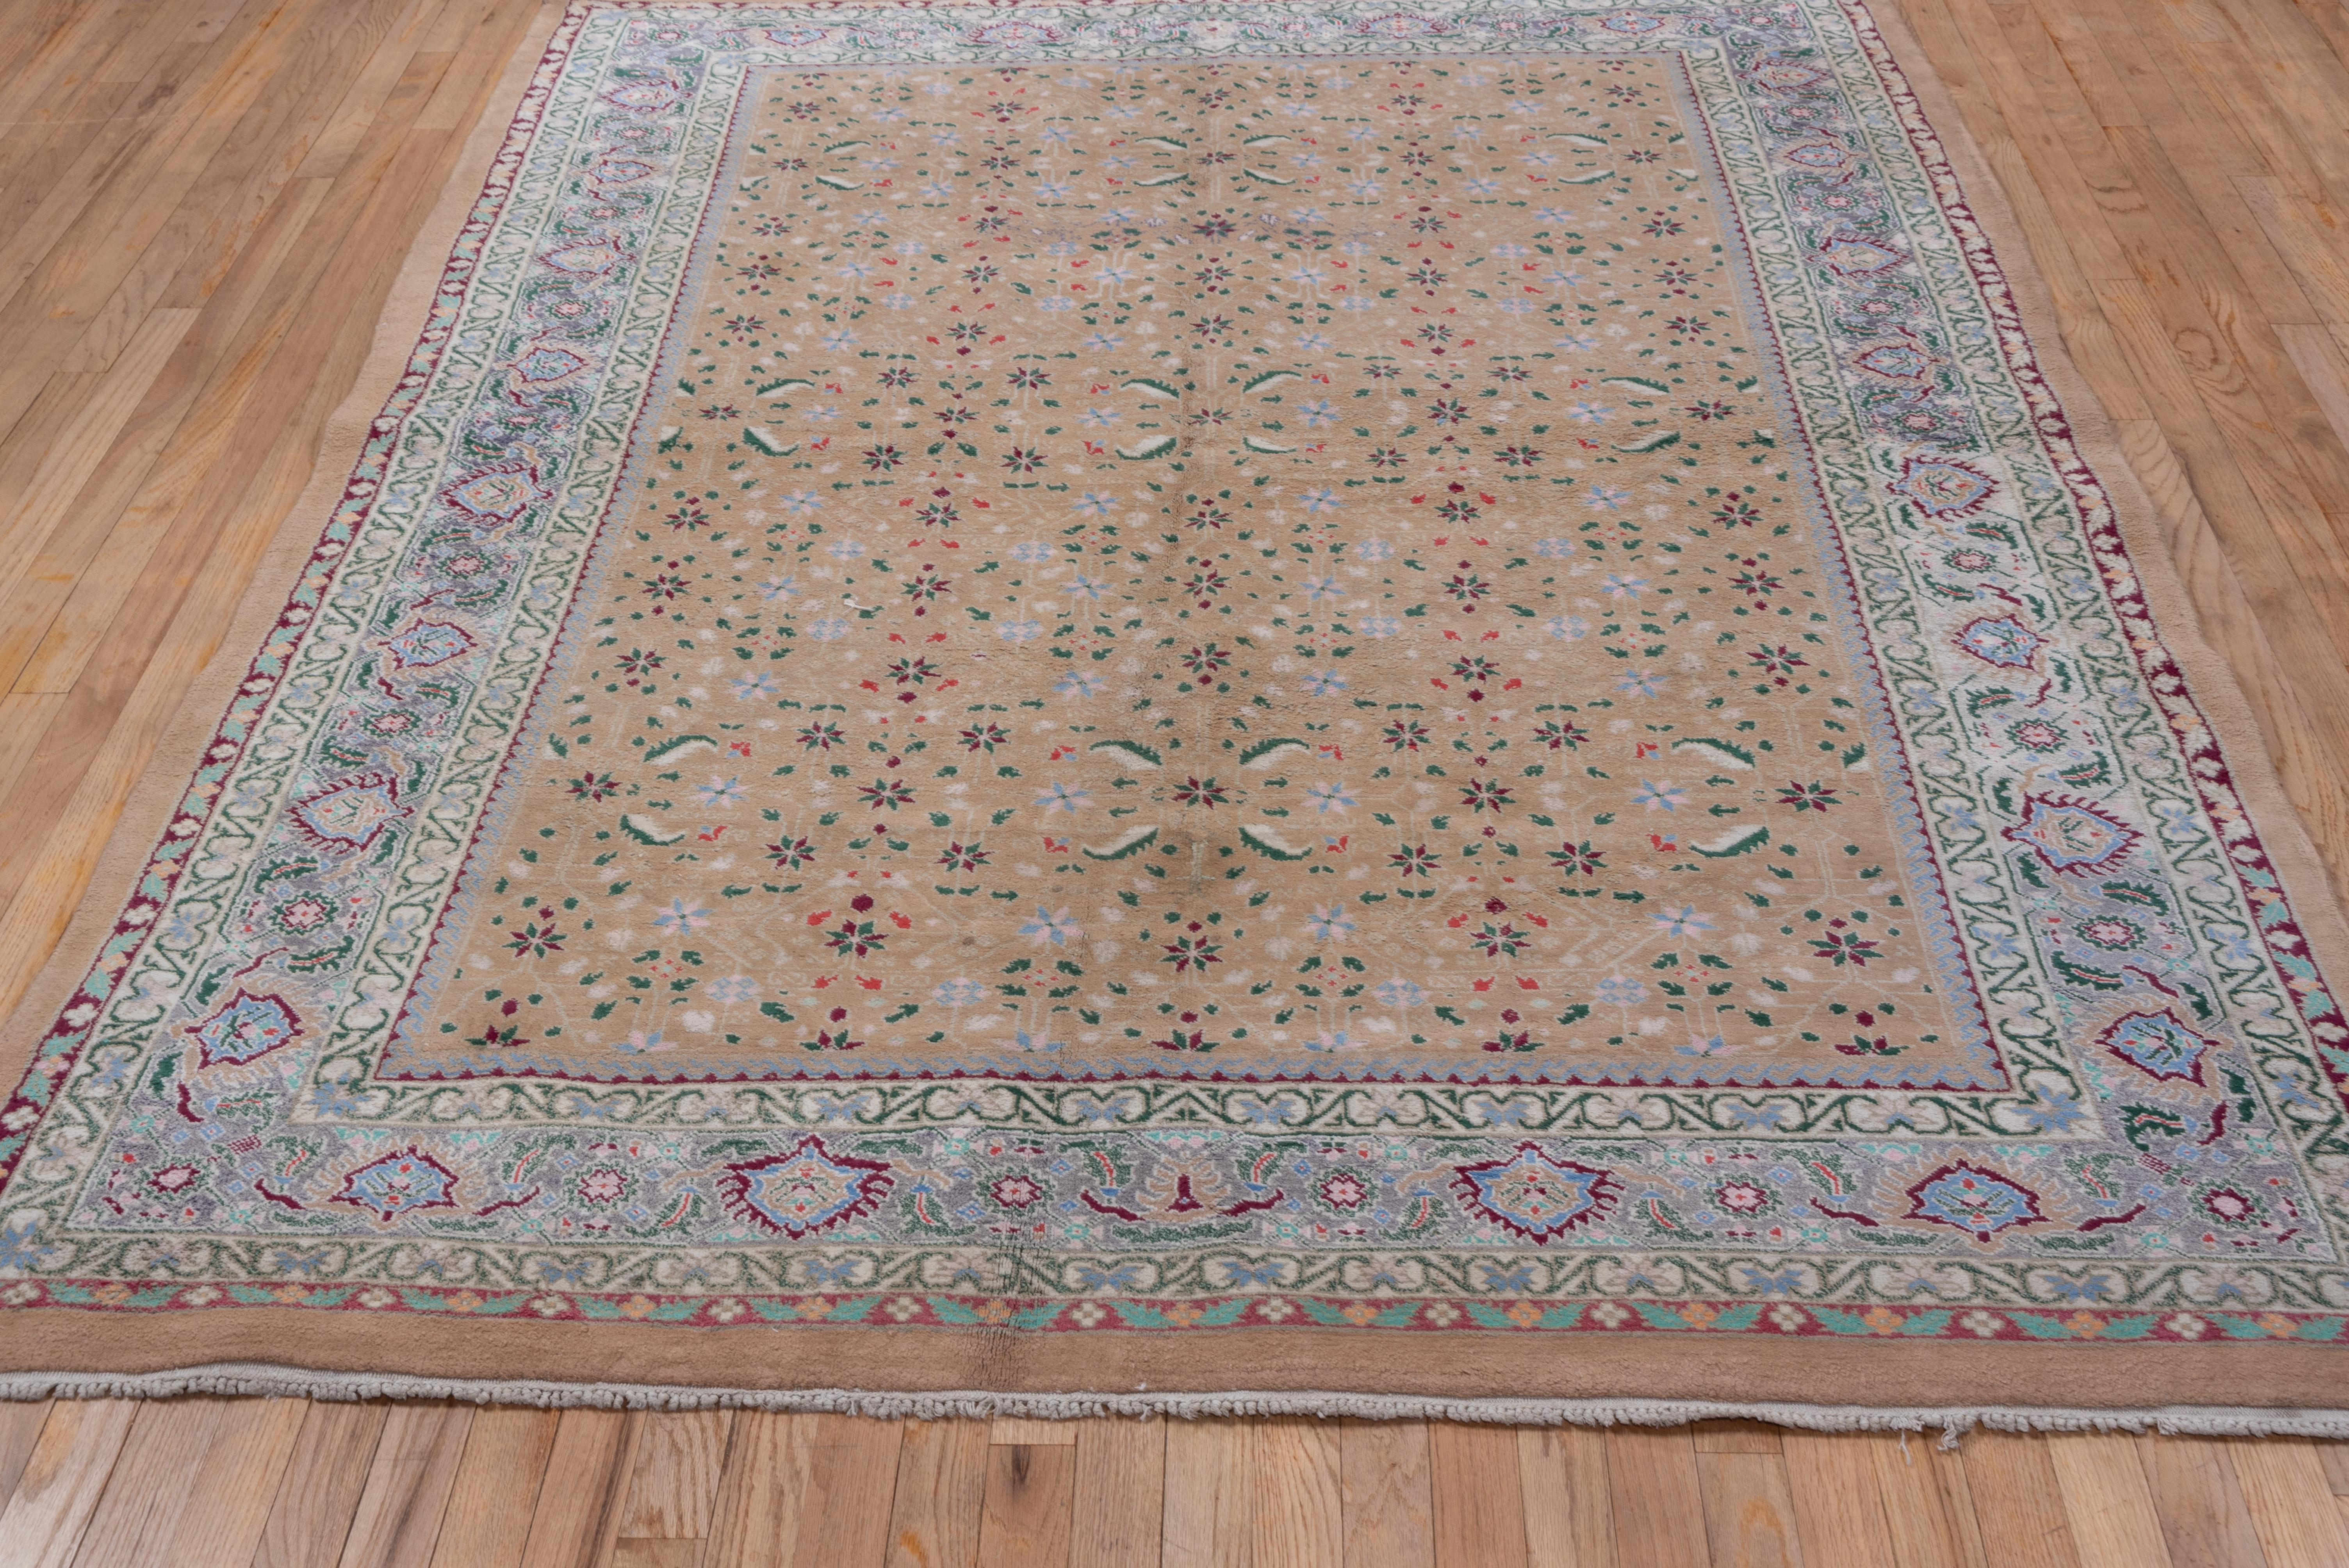 This northern Indian town carpet presents a buff field with a repeating all-over pattern of small stars, lancet leaves and still stems, detailed in ecru, pale blue and dark brown. The main border abrashes in blue tones and exhibits a flaming